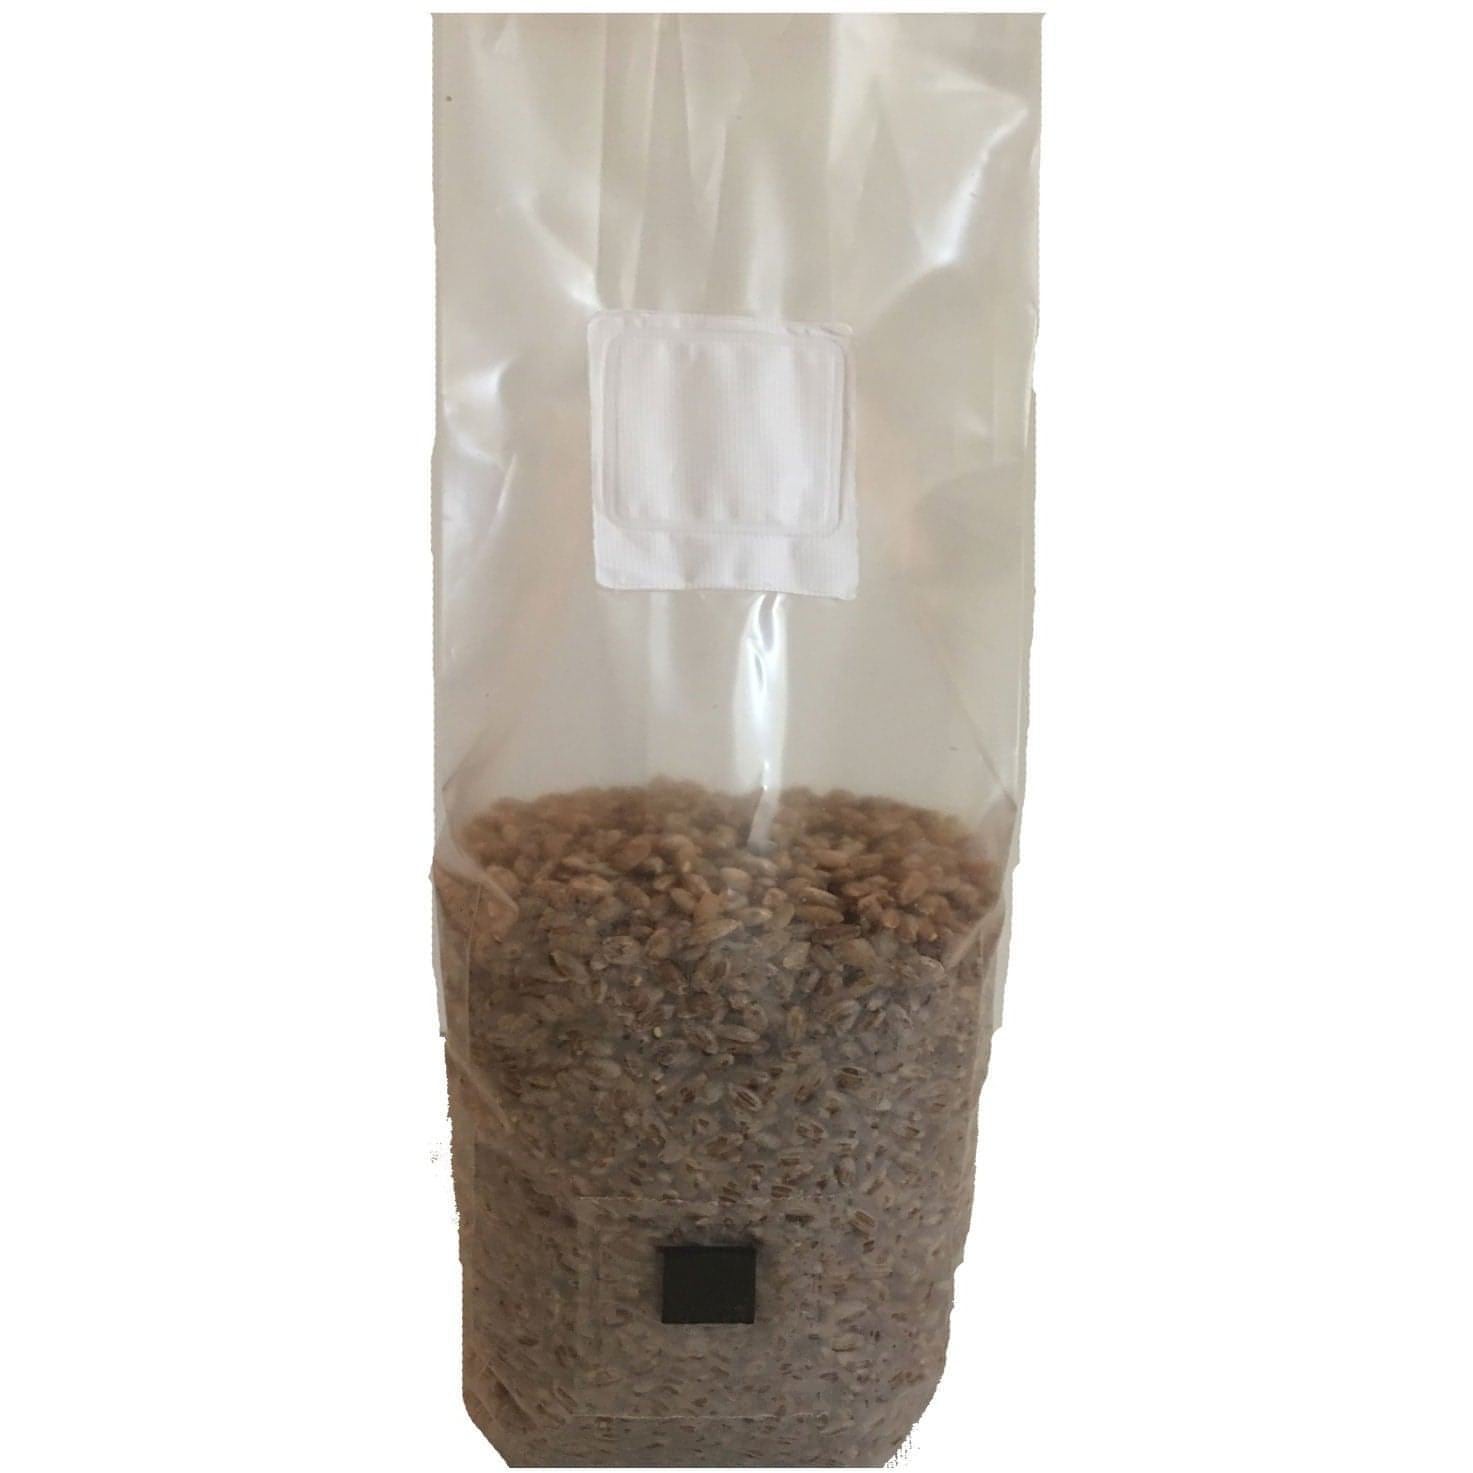 Millet Mushroom Spawn Bag 2 lb with Injection Port – Shroomability